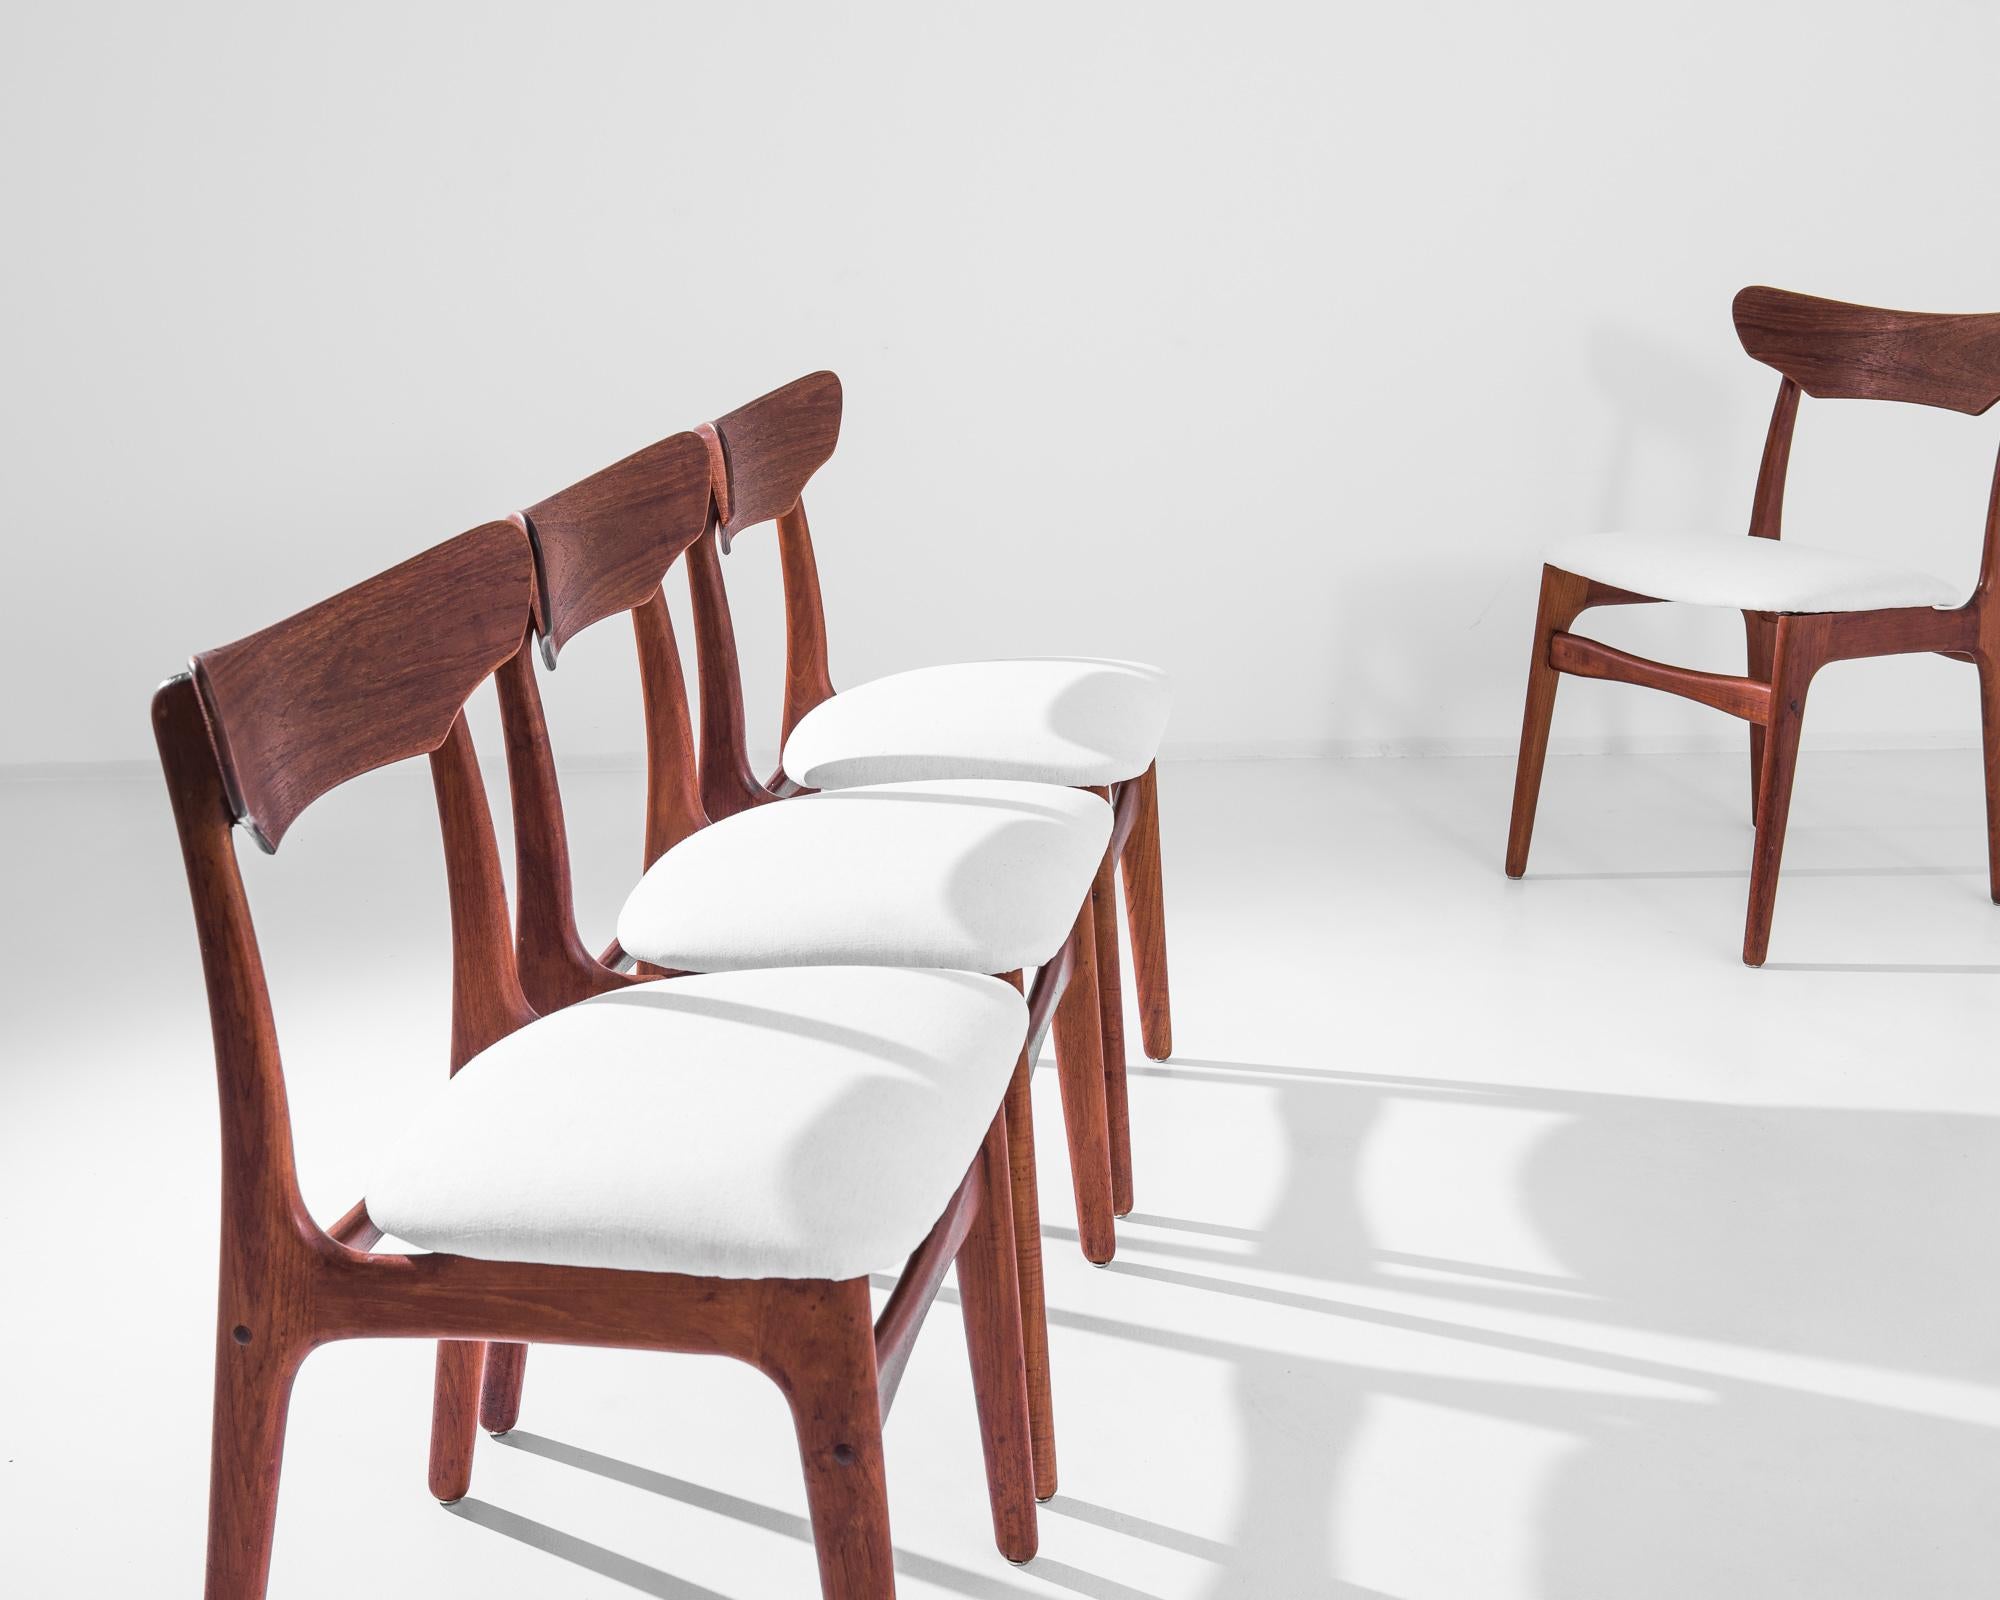 A set of four midcentury Modernist wooden dining chairs by Danish furniture designers Schionning & Elgaard. This design embodies the characteristic silhouette for which these designers are known — the rounded backrest, the eager forward slant of the